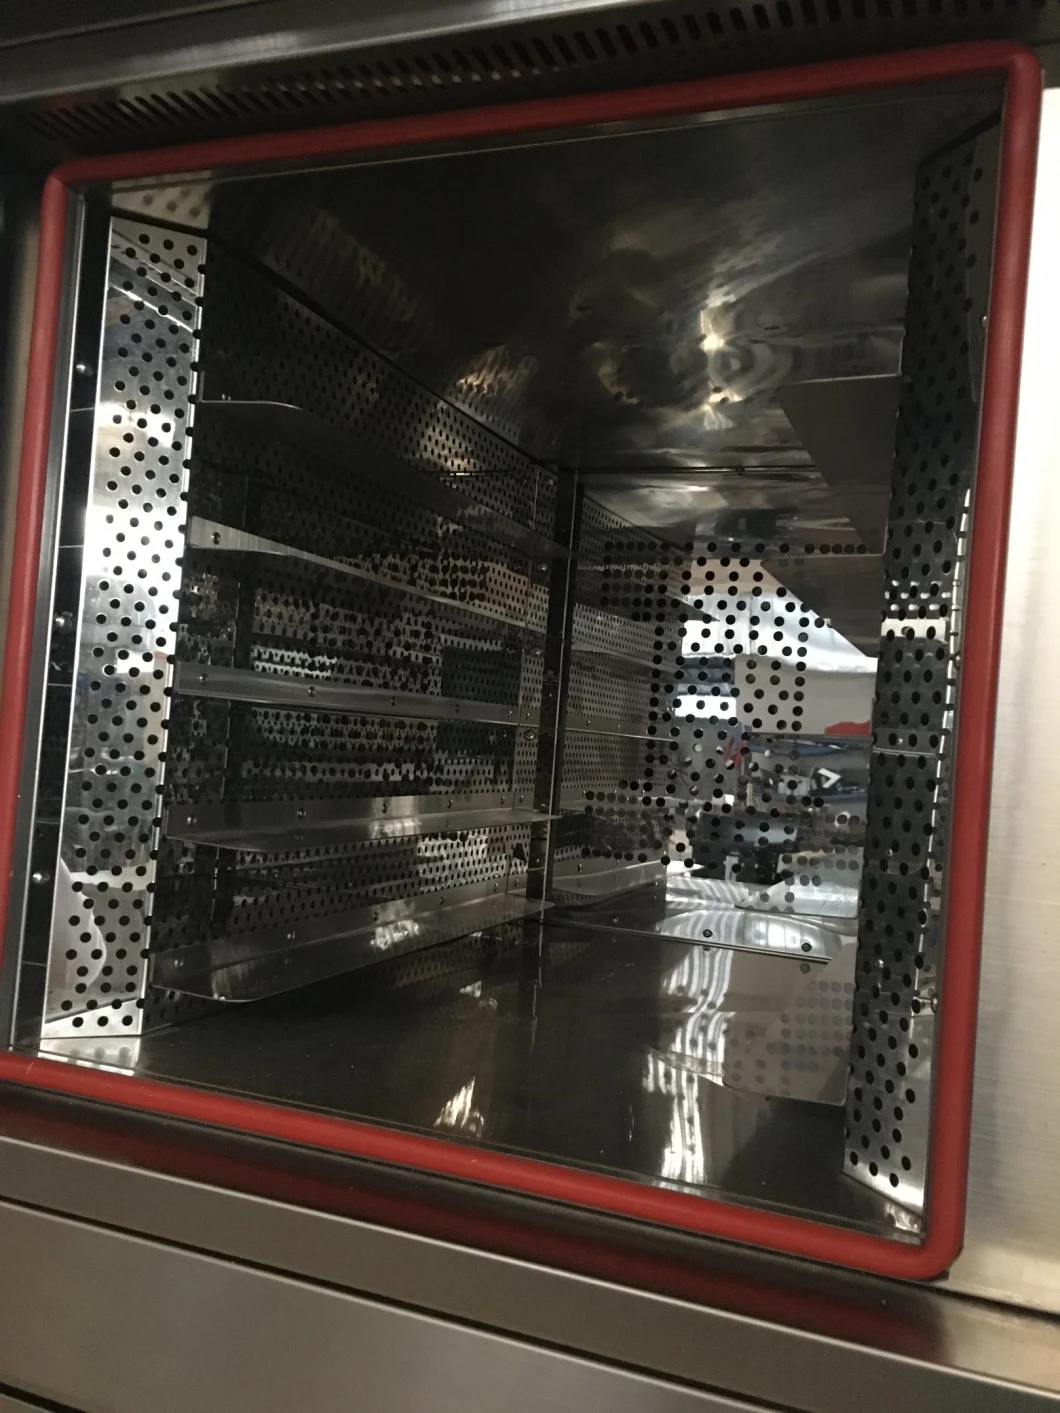 Convection Oven for Baking Bread in Bread Baking Machine